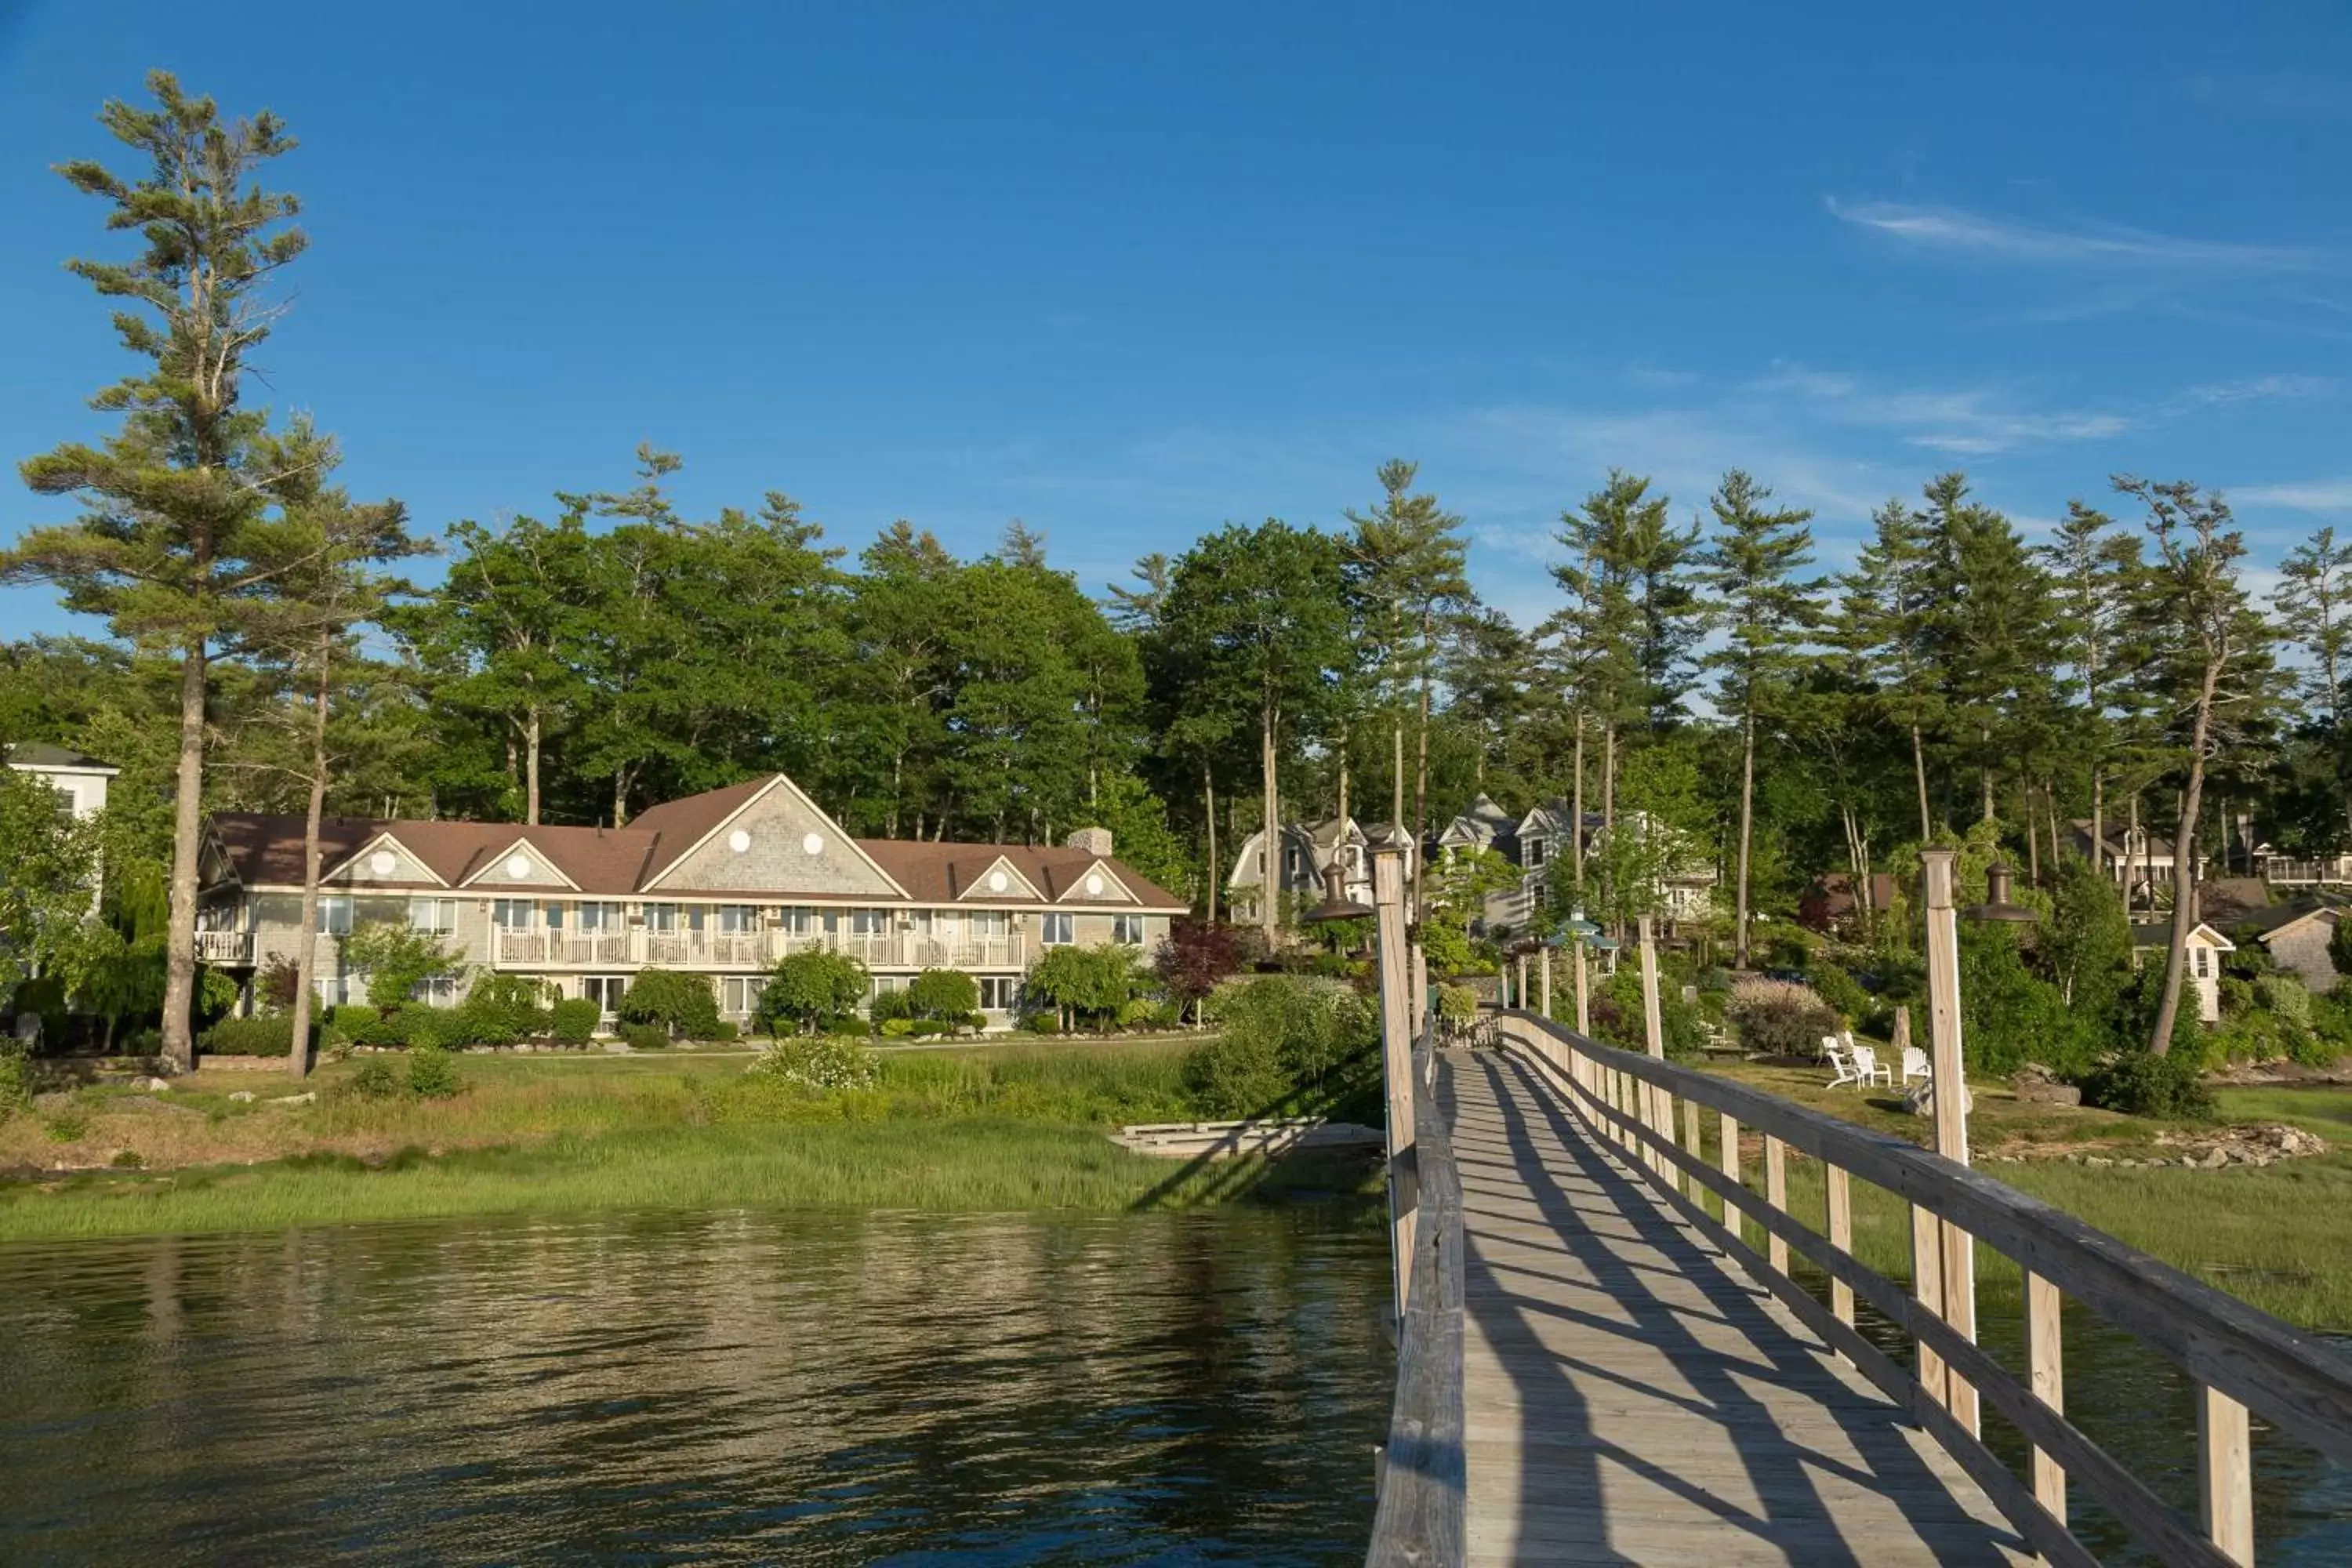 Area and facilities in Sheepscot Harbour Village Resort